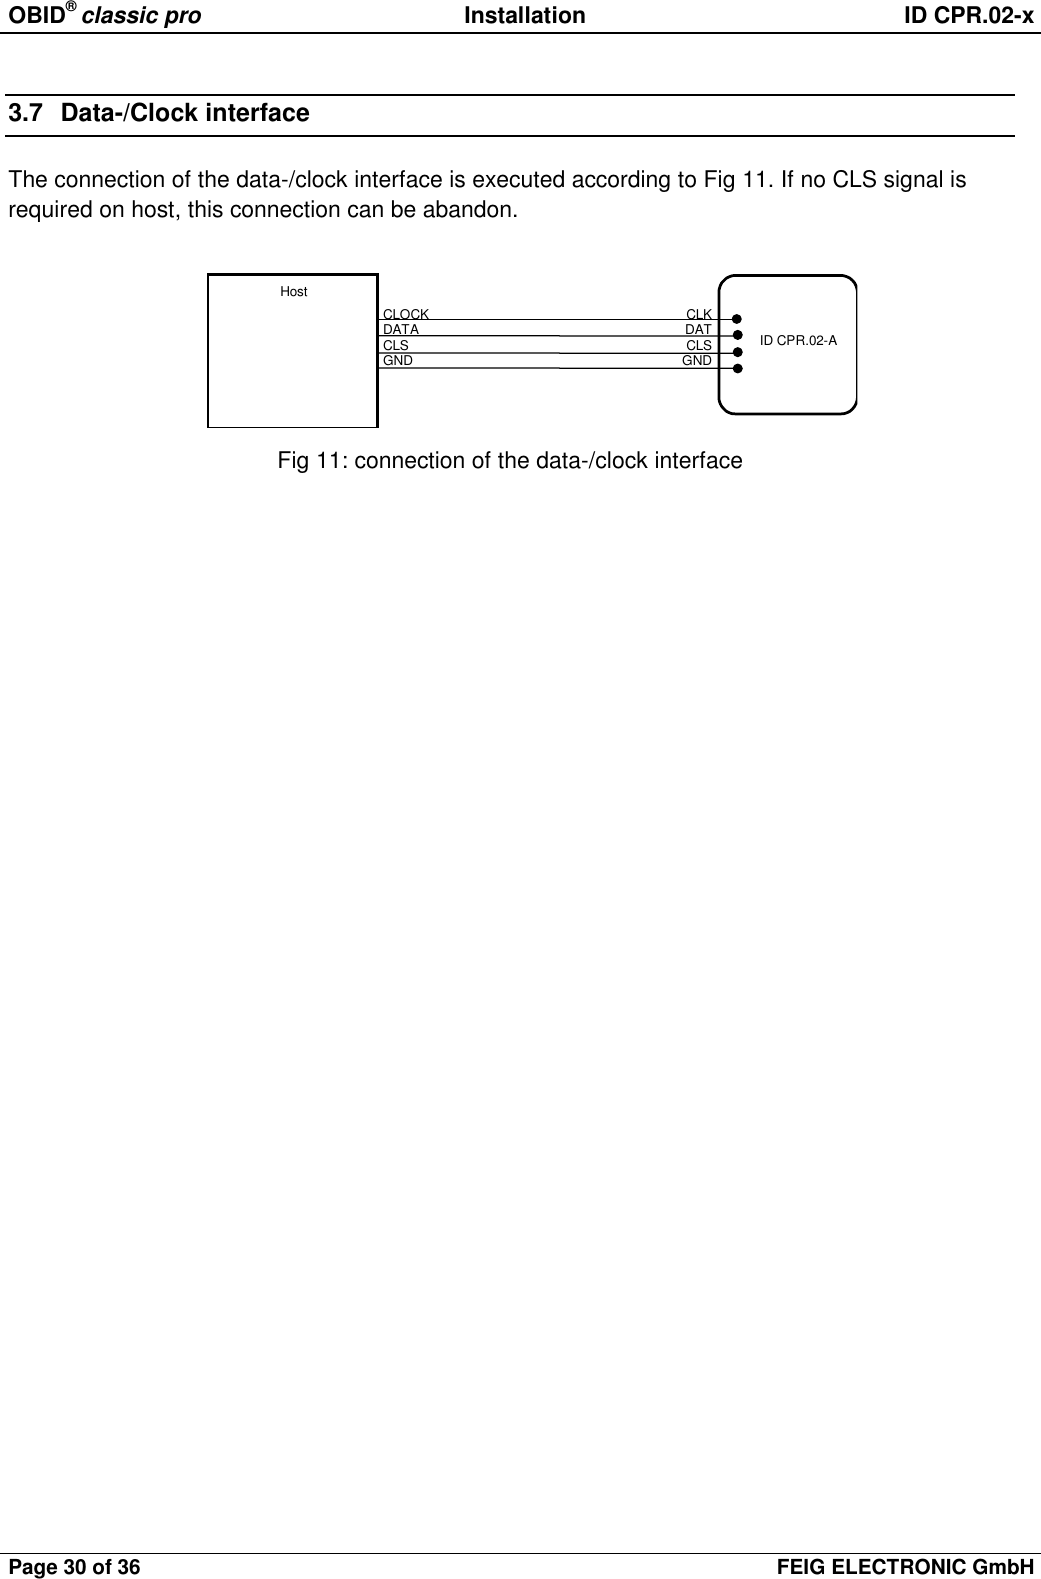 OBID® classic pro Installation ID CPR.02-xPage 30 of 36 FEIG ELECTRONIC GmbH3.7 Data-/Clock interfaceThe connection of the data-/clock interface is executed according to Fig 11. If no CLS signal isrequired on host, this connection can be abandon.Fig 11: connection of the data-/clock interfaceHostID CPR.02-ACLOCKDATACLSGNDCLKDATCLSGND